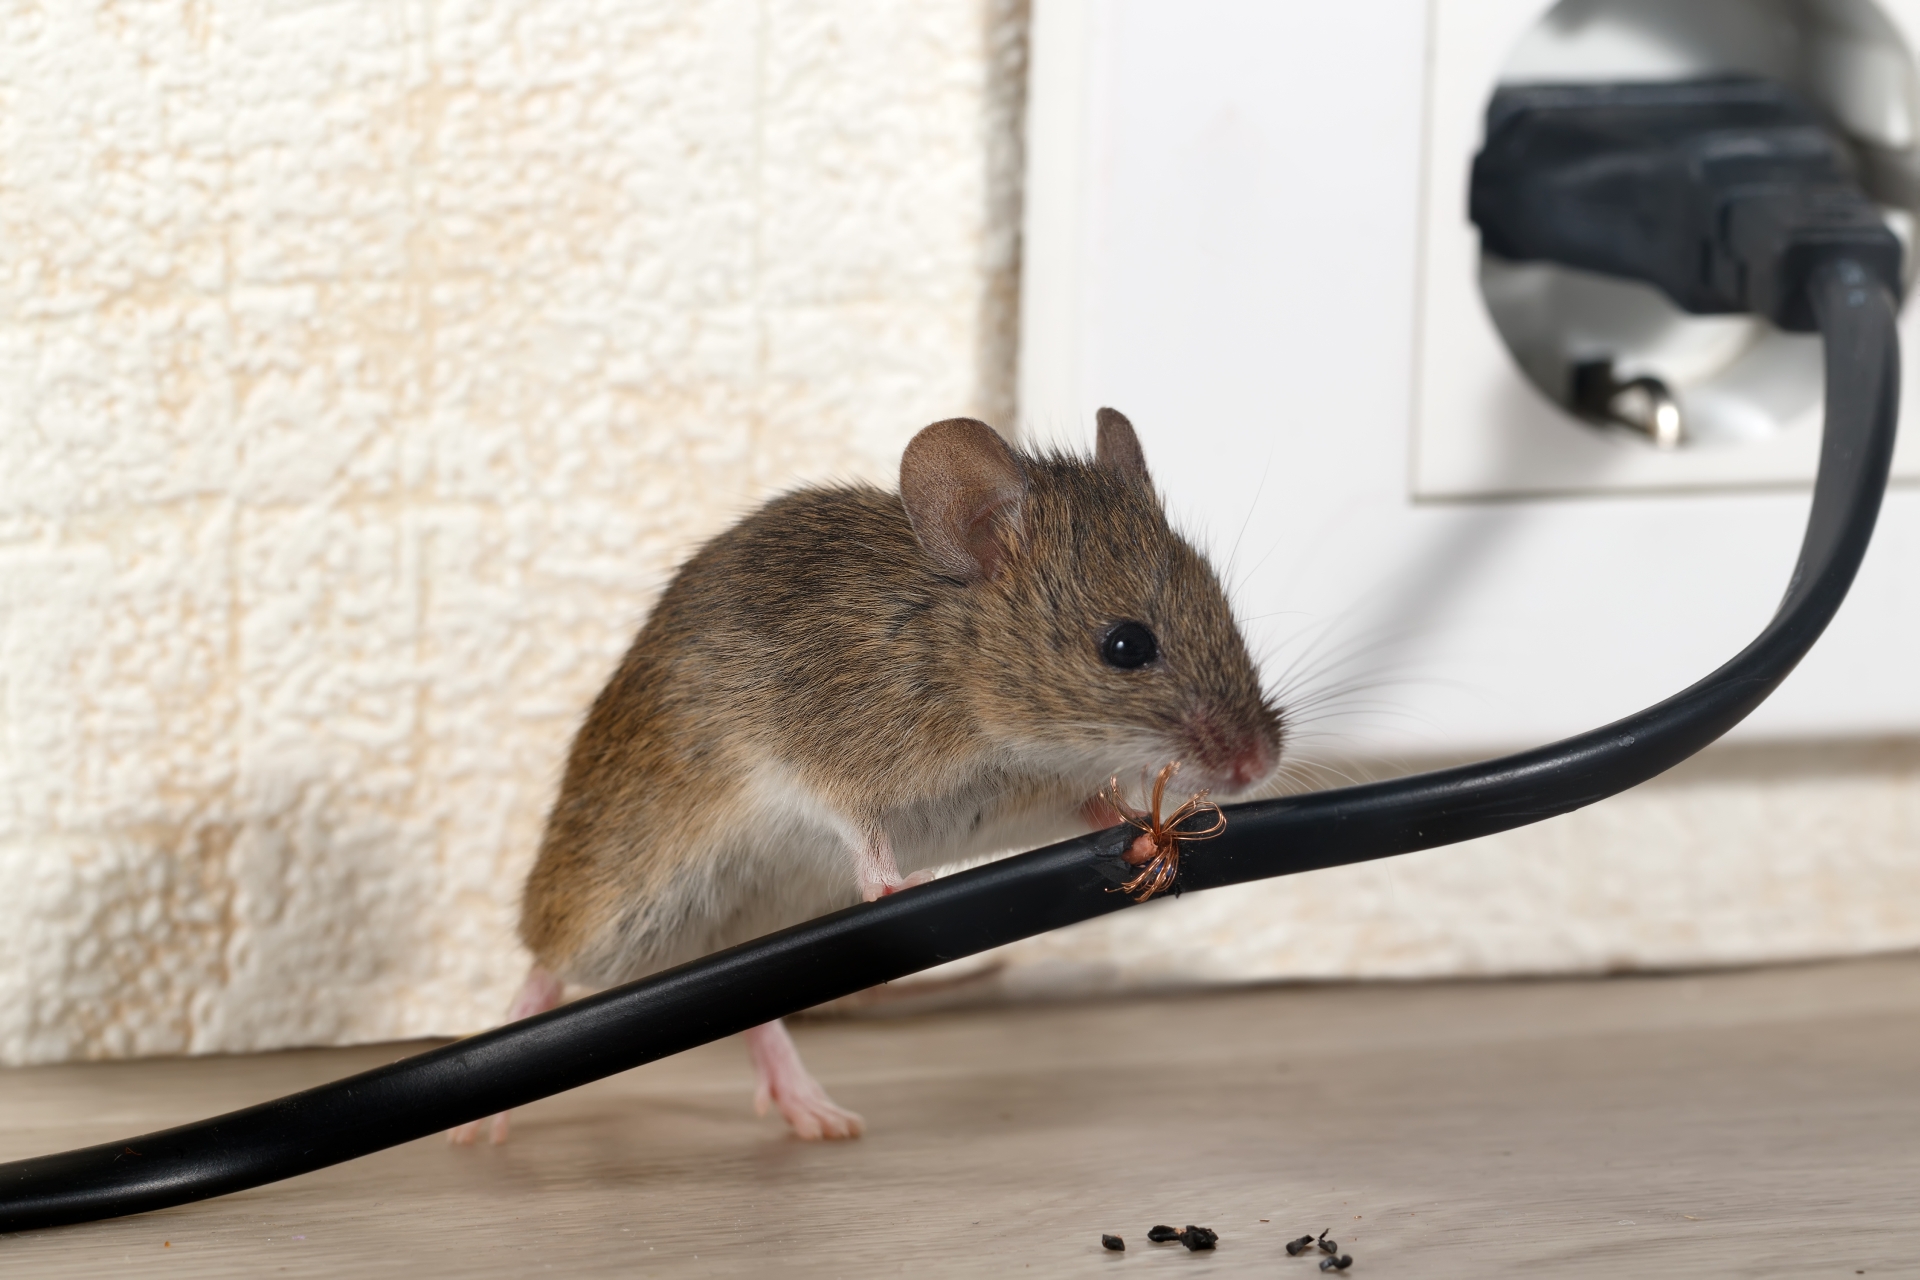 Mice Infestation, Pest Control in Hampton Wick, Norbiton, KT1. Call Now 020 8166 9746